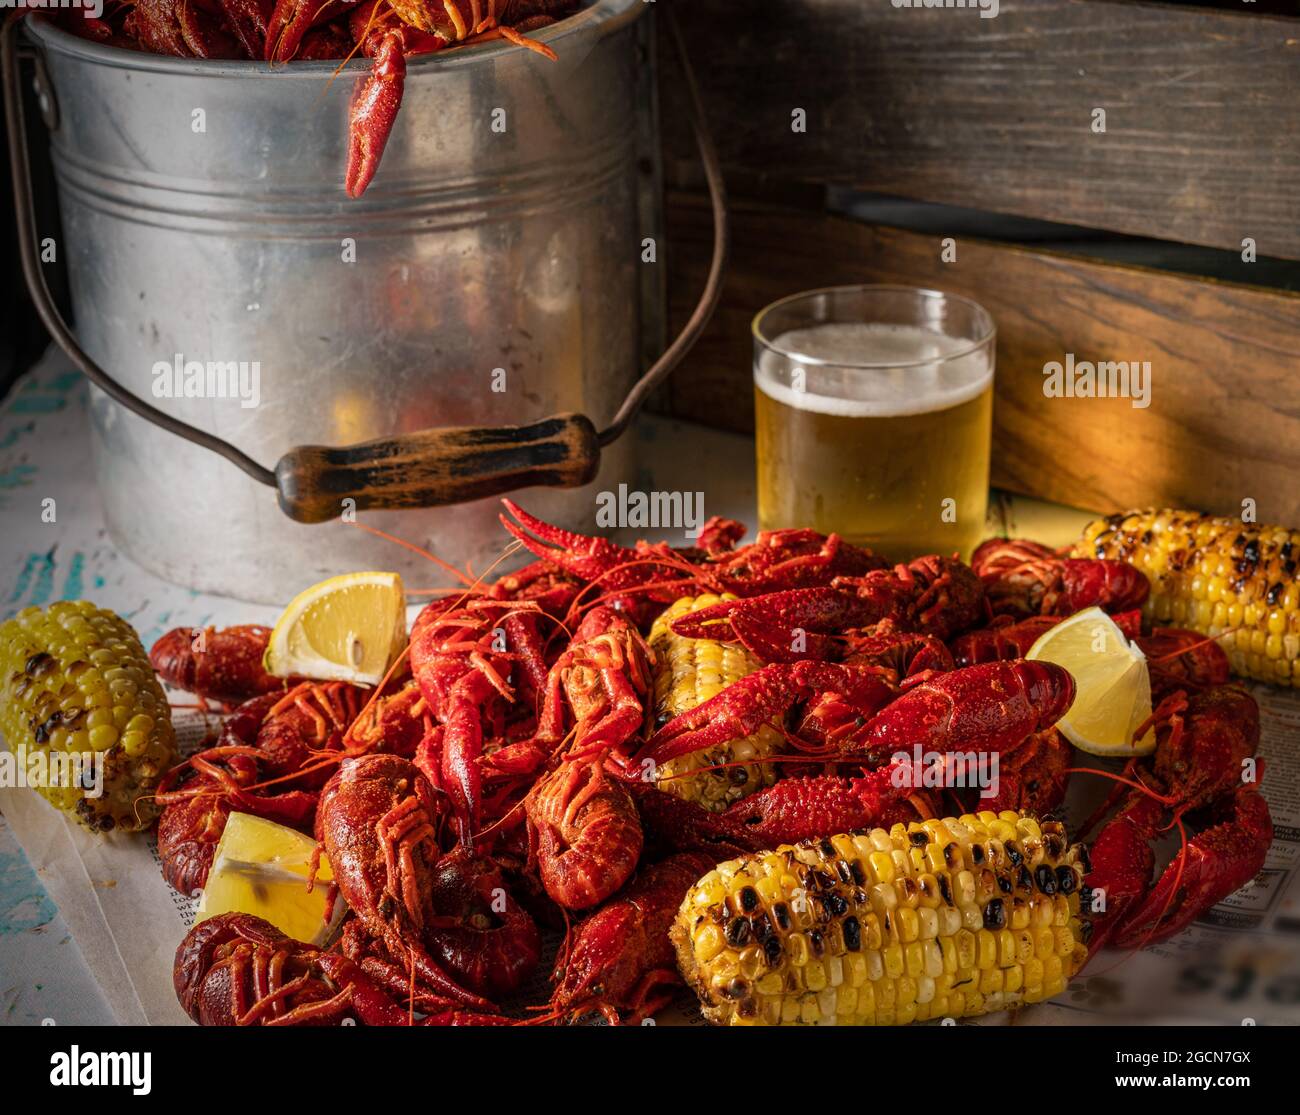 Steamed crawfish with grilled corn and beer. Stock Photo